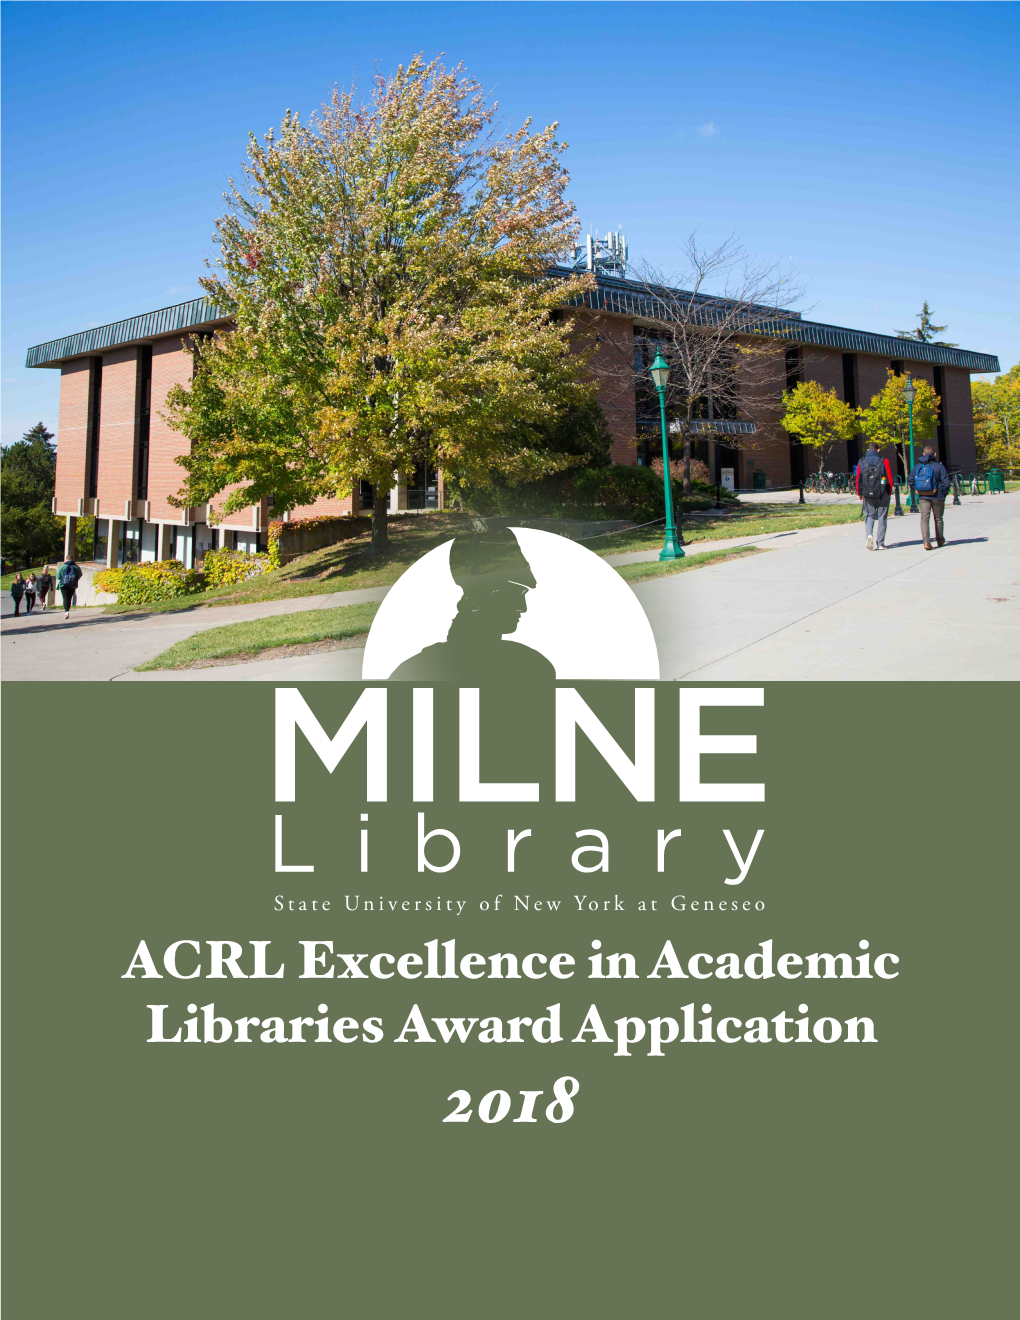 ACRL Excellence in Academic Libraries Award Application 2018 Introduction Contents